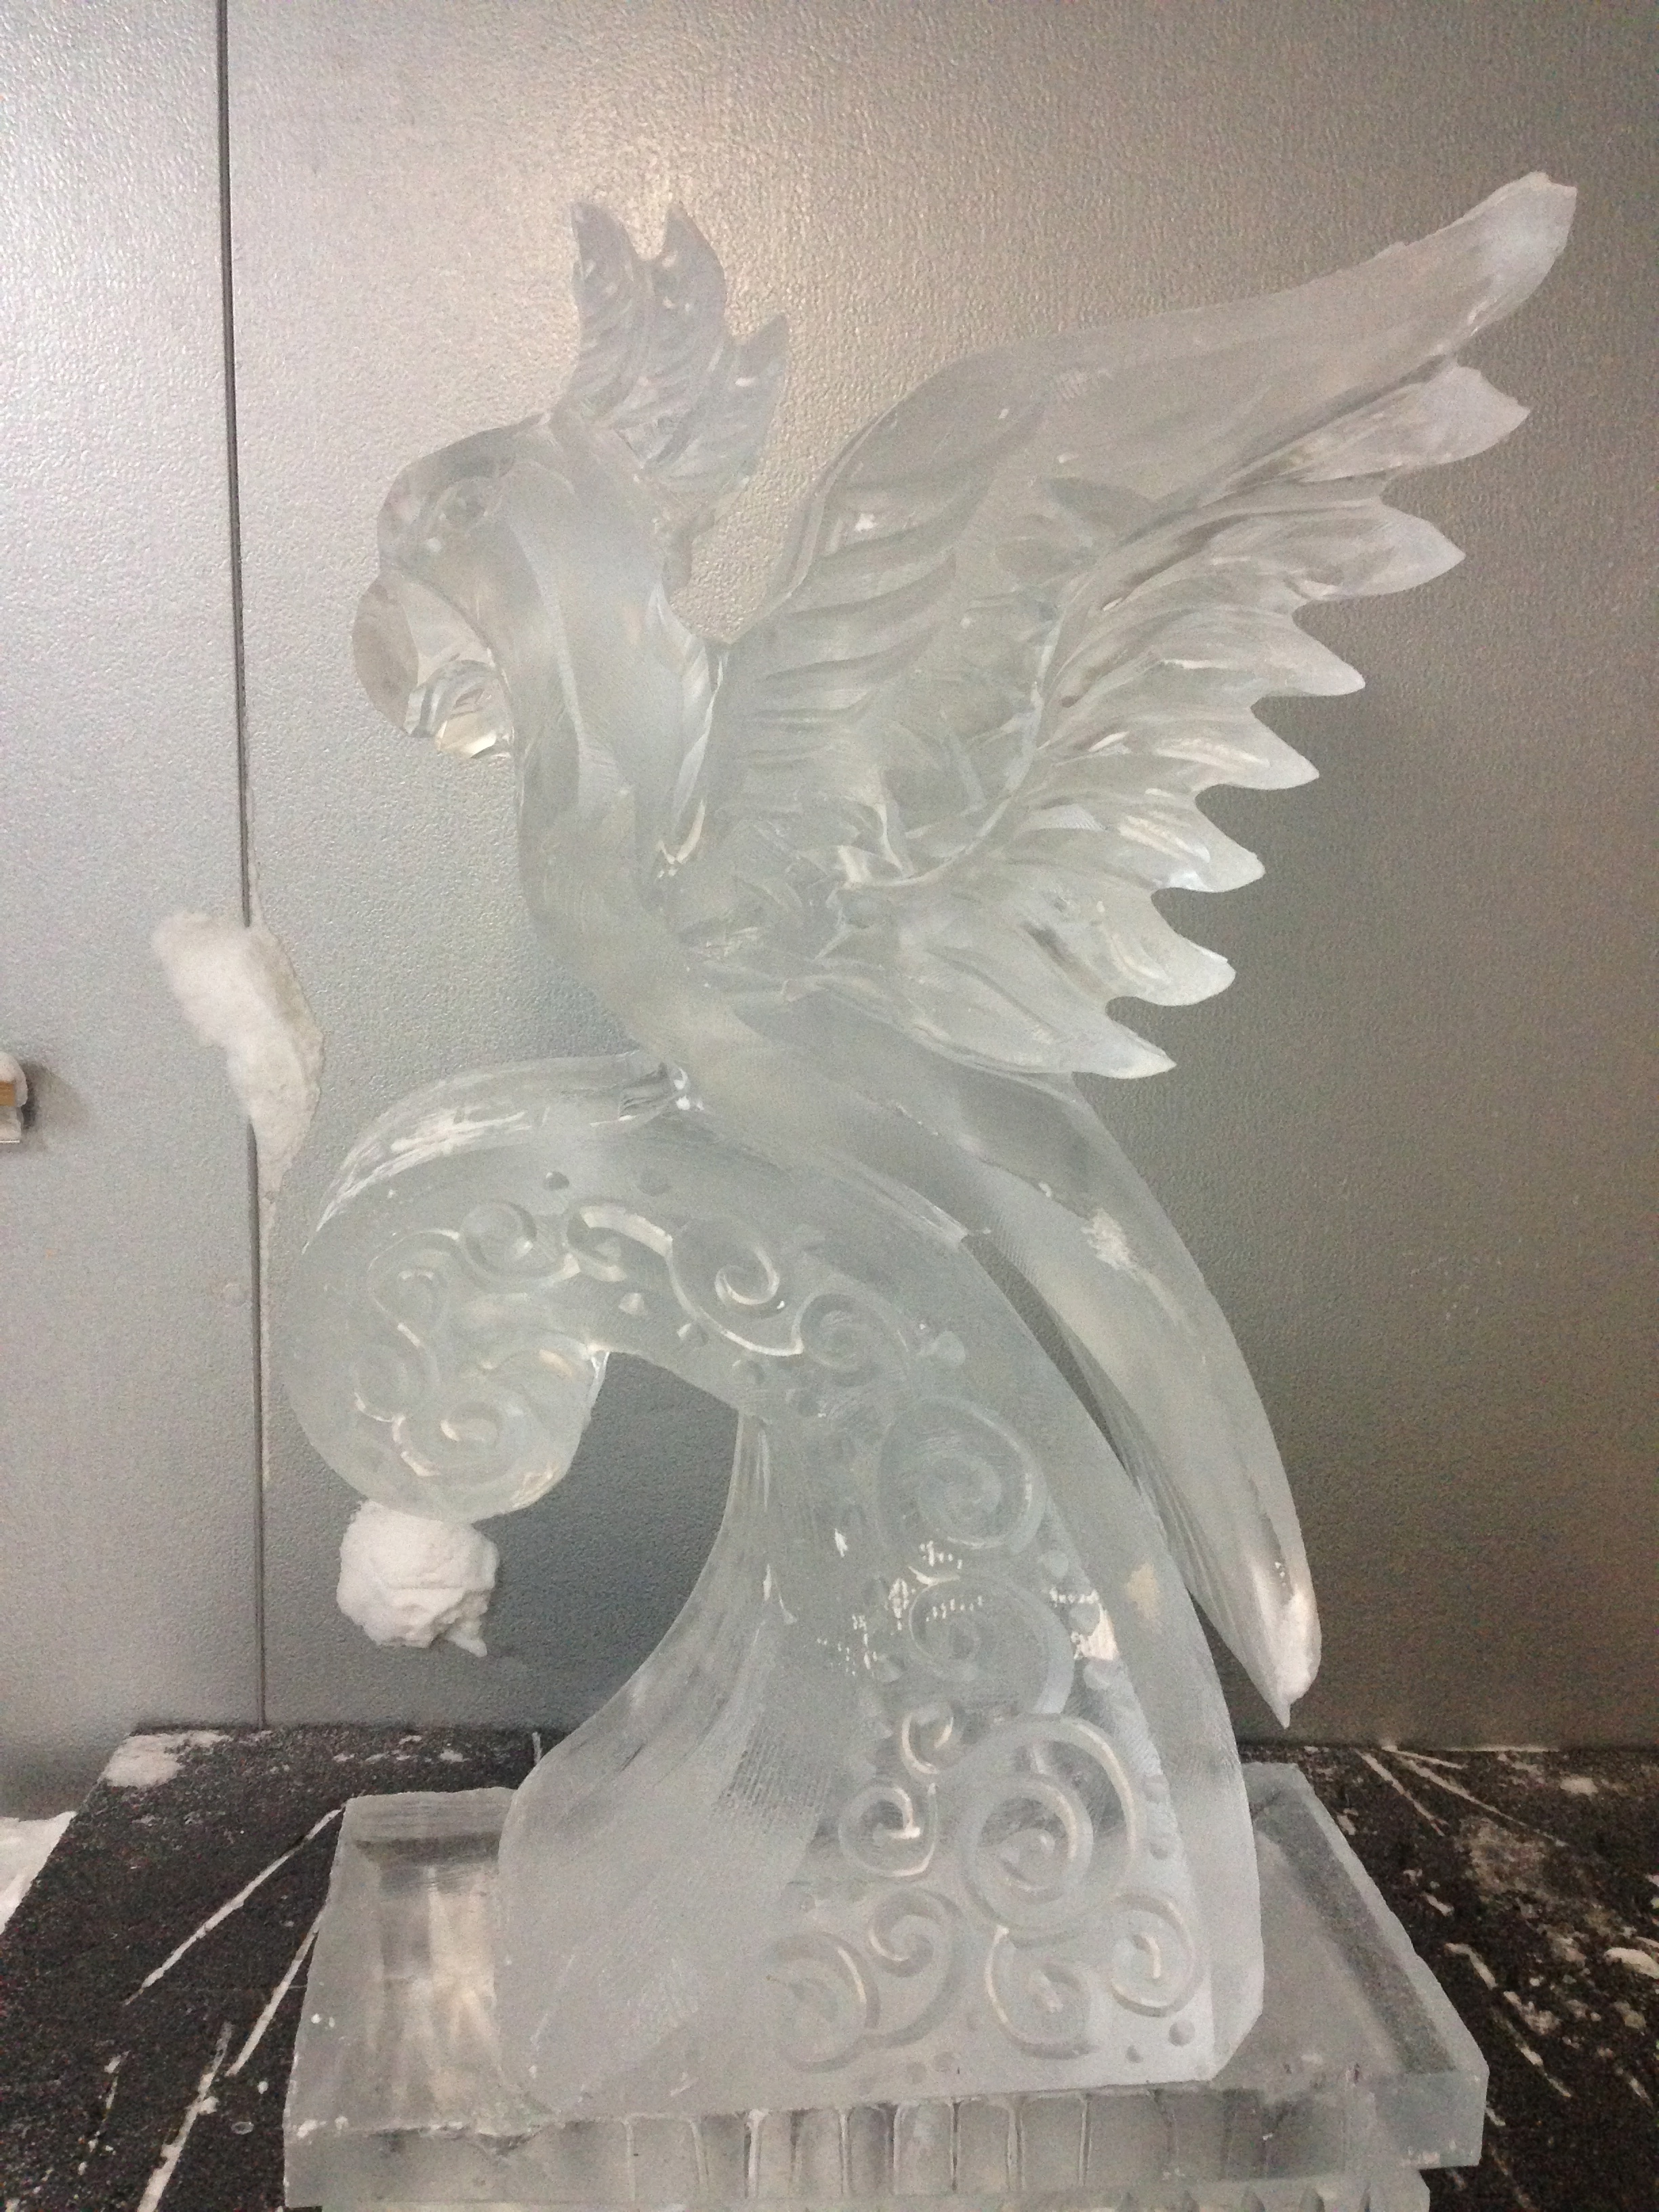 Abstract – Brilliant Ice Sculpture